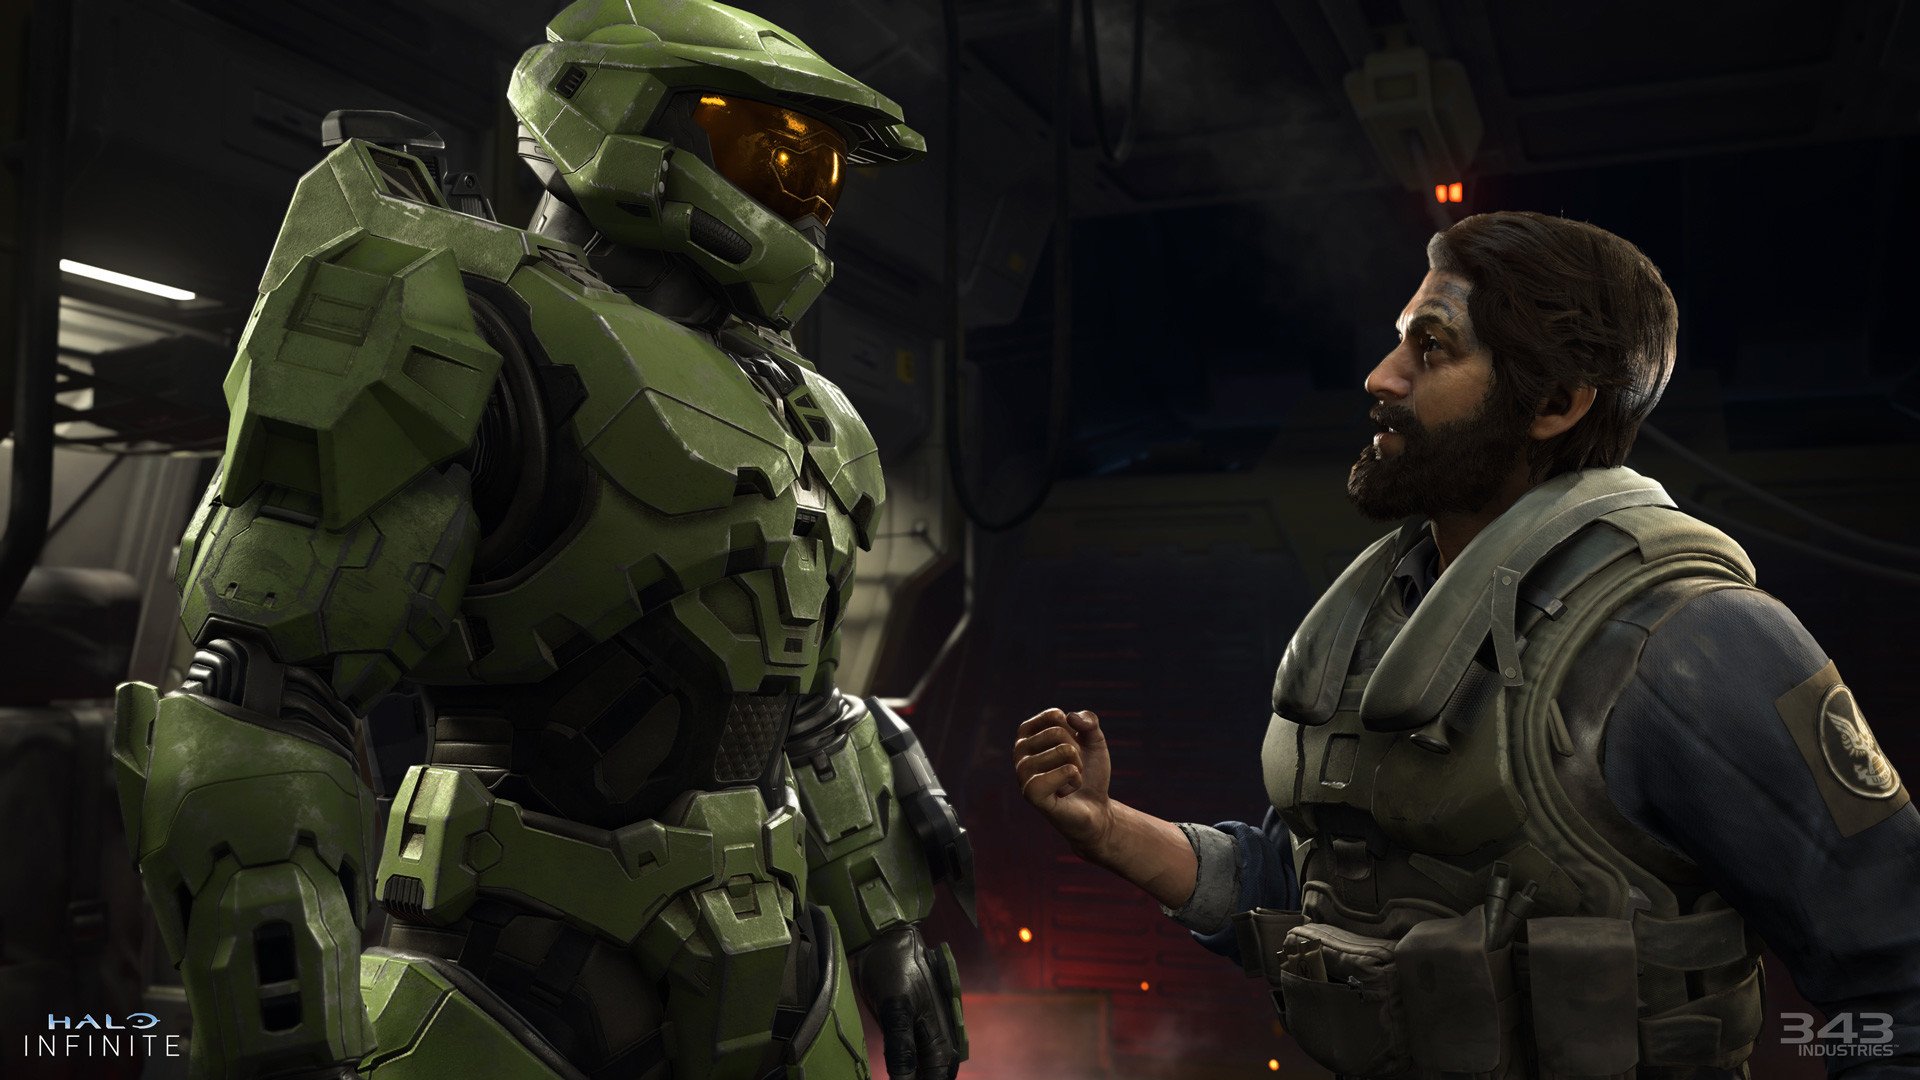 343 Industries to develop a 'new project in the Halo universe' [Update]